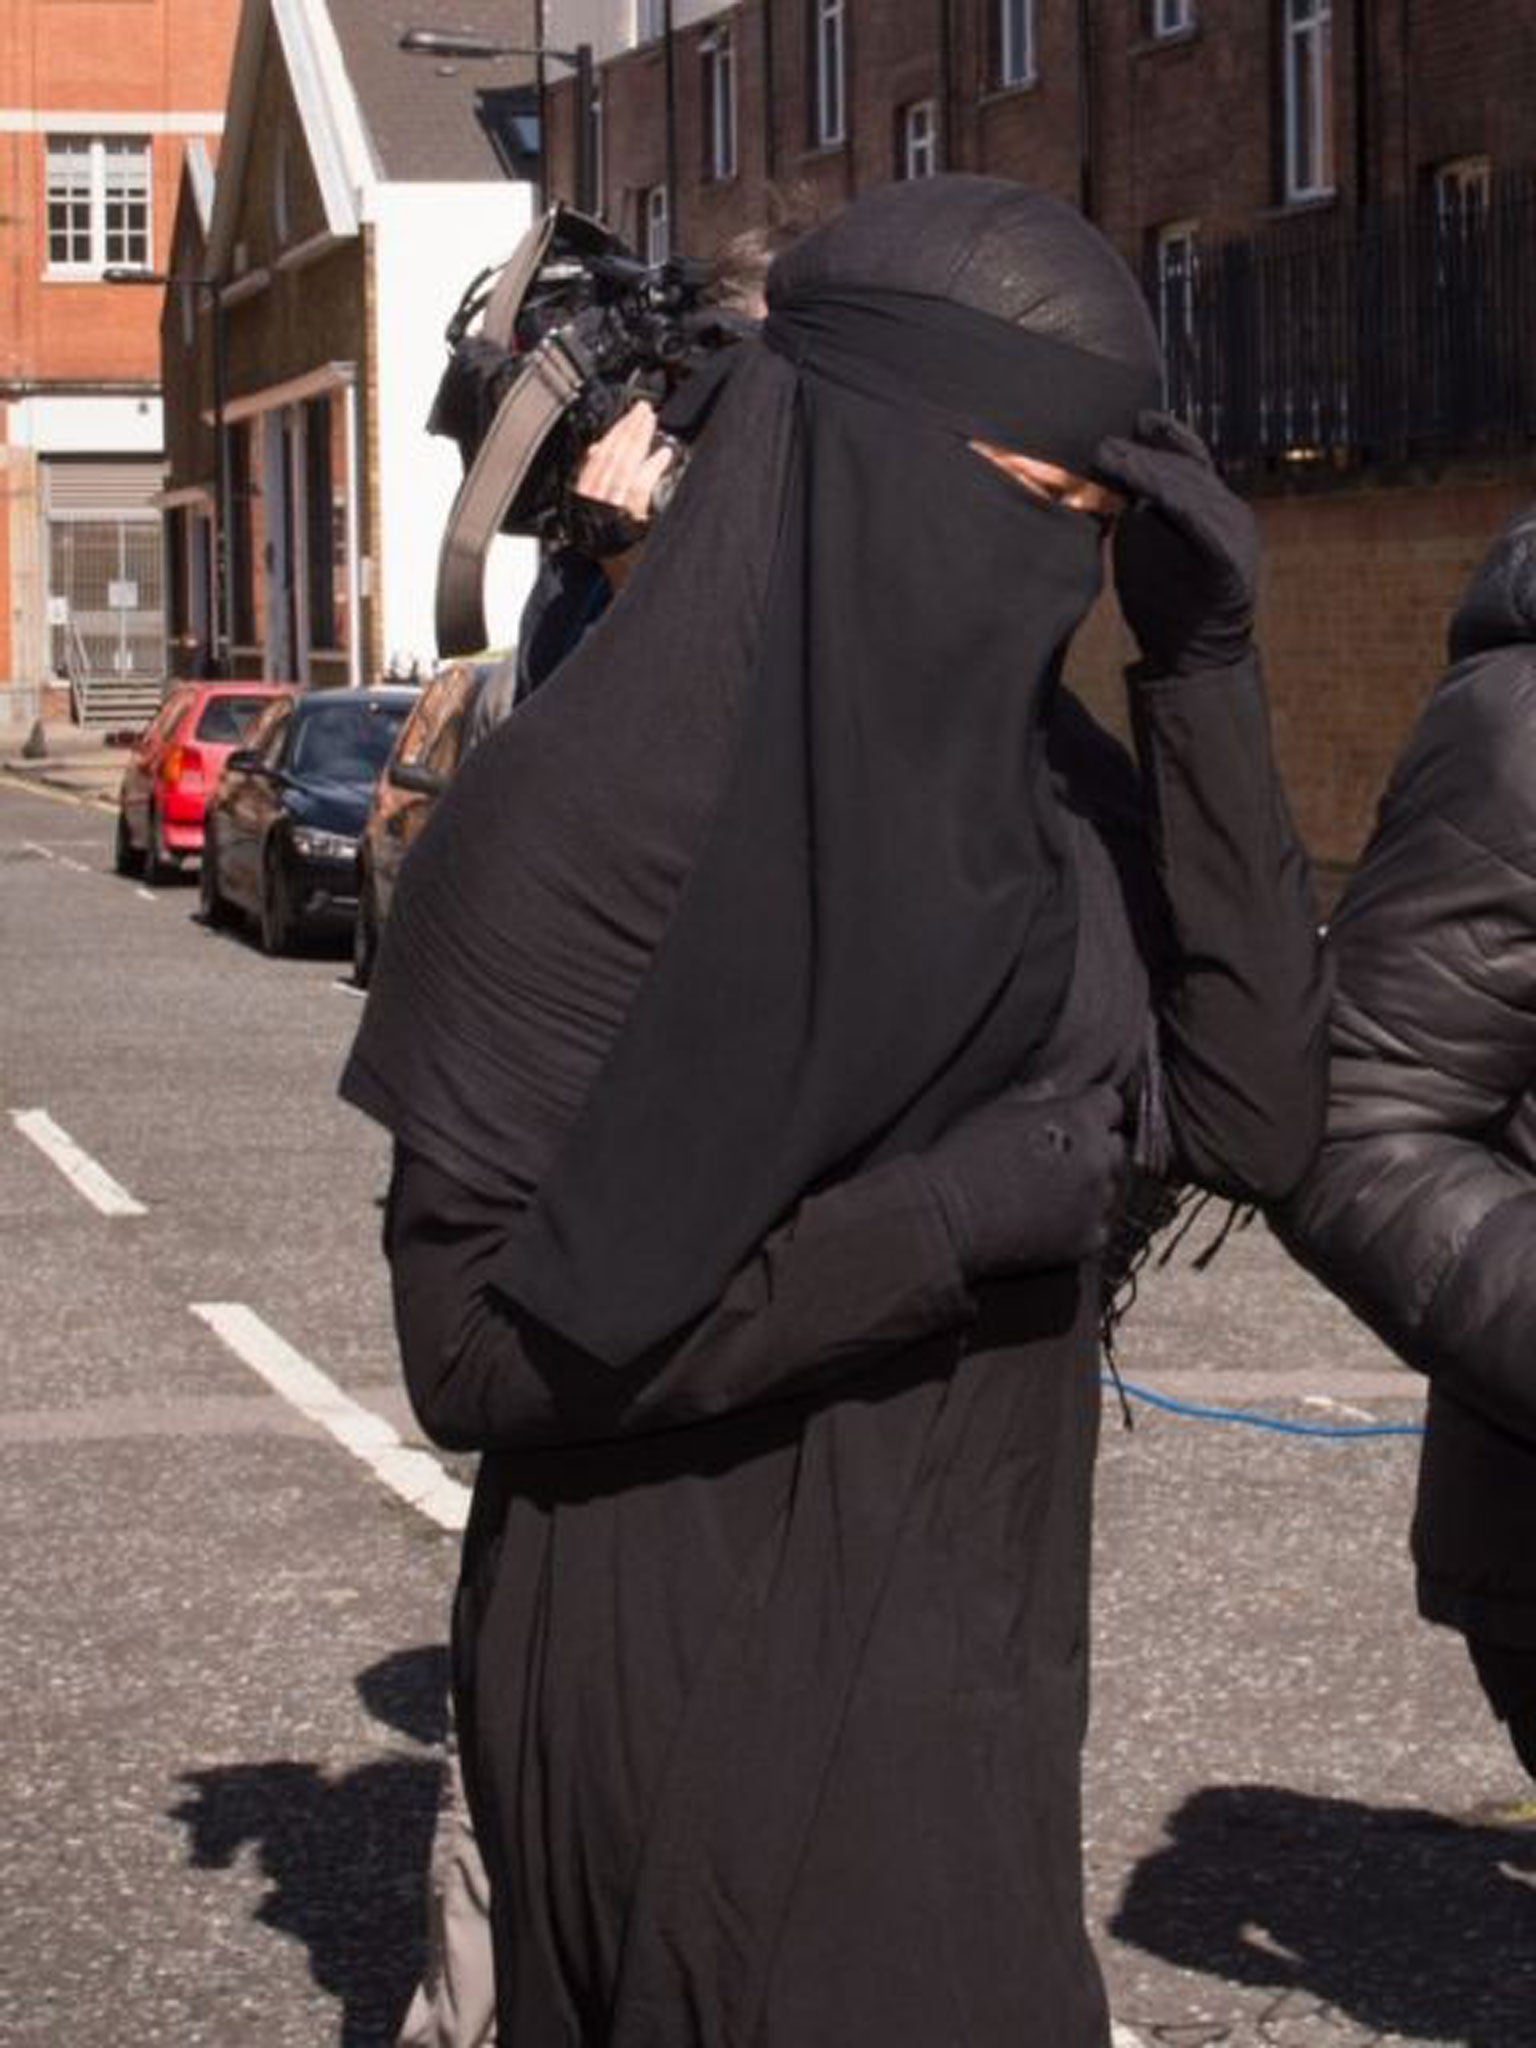 A Muslim woman, who cannot be named for legal reasons, arrives at Blackfriars Crown Court in London where a judge has ruled that she will be allowed to stand trial while wearing a full-face veil but must remove it while giving evidence